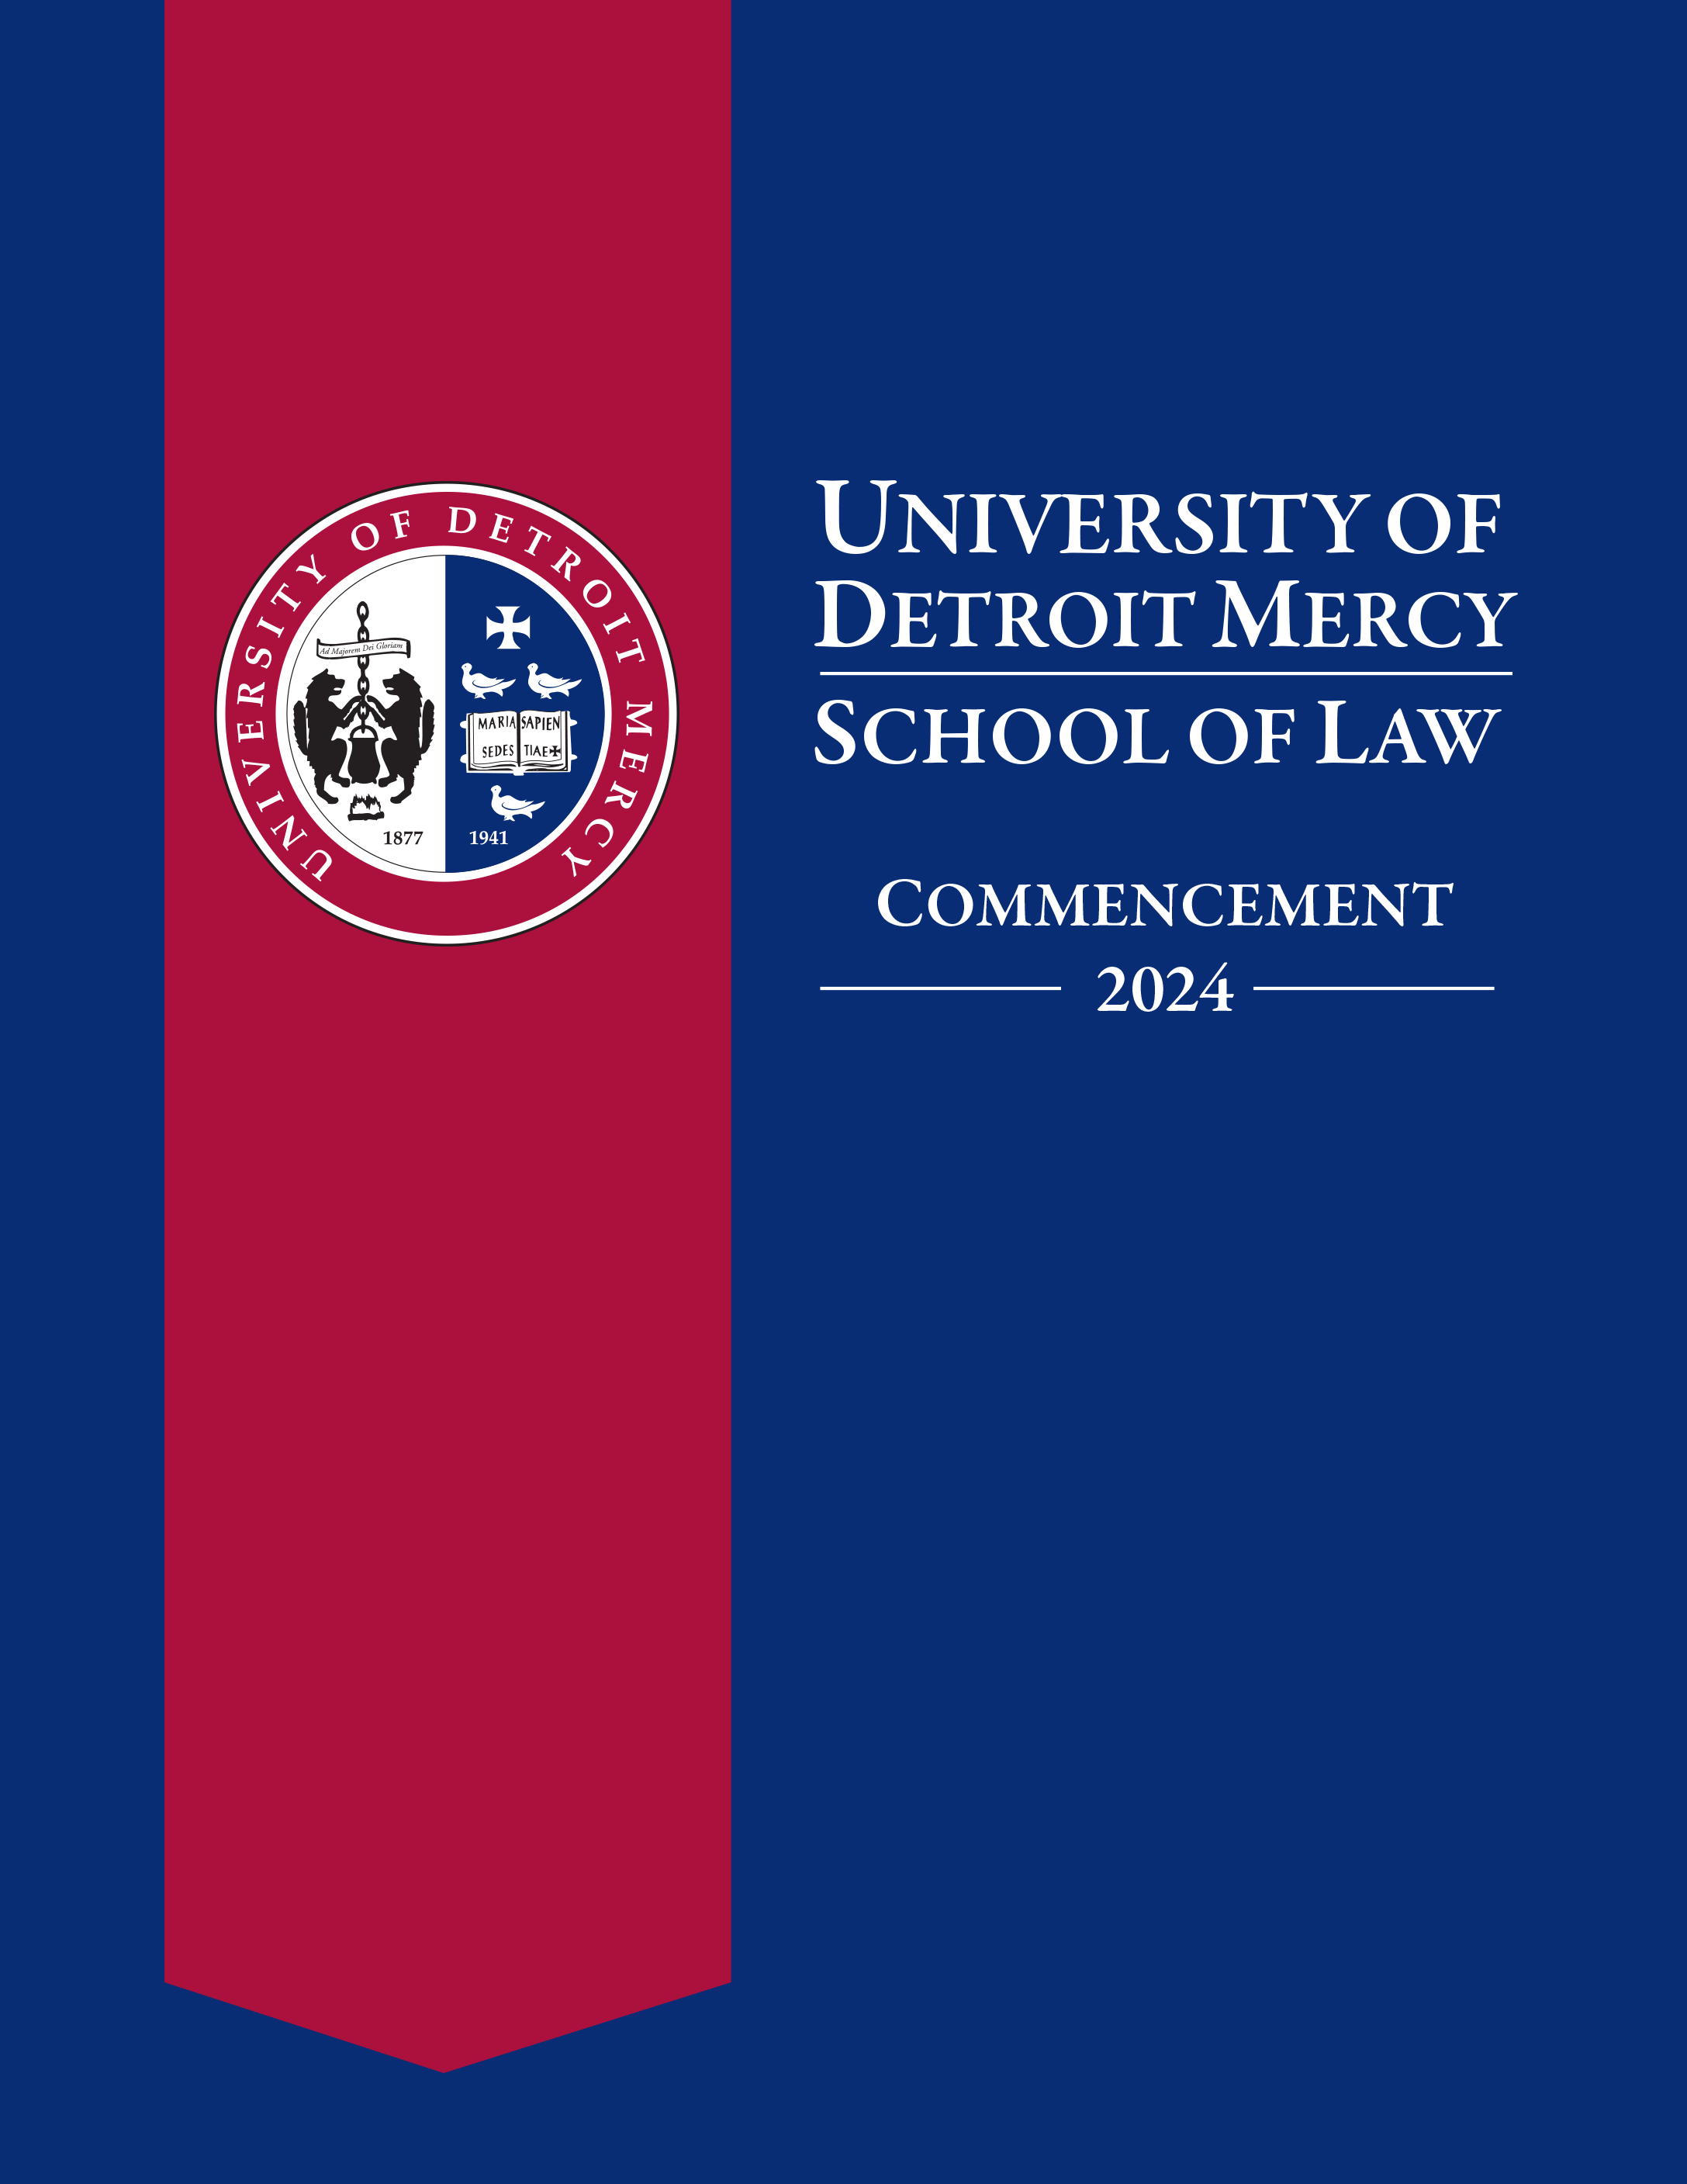 University of Detroit Mercy Law 2024 Commencement program featuring the UDM crest on a red and blue cover.